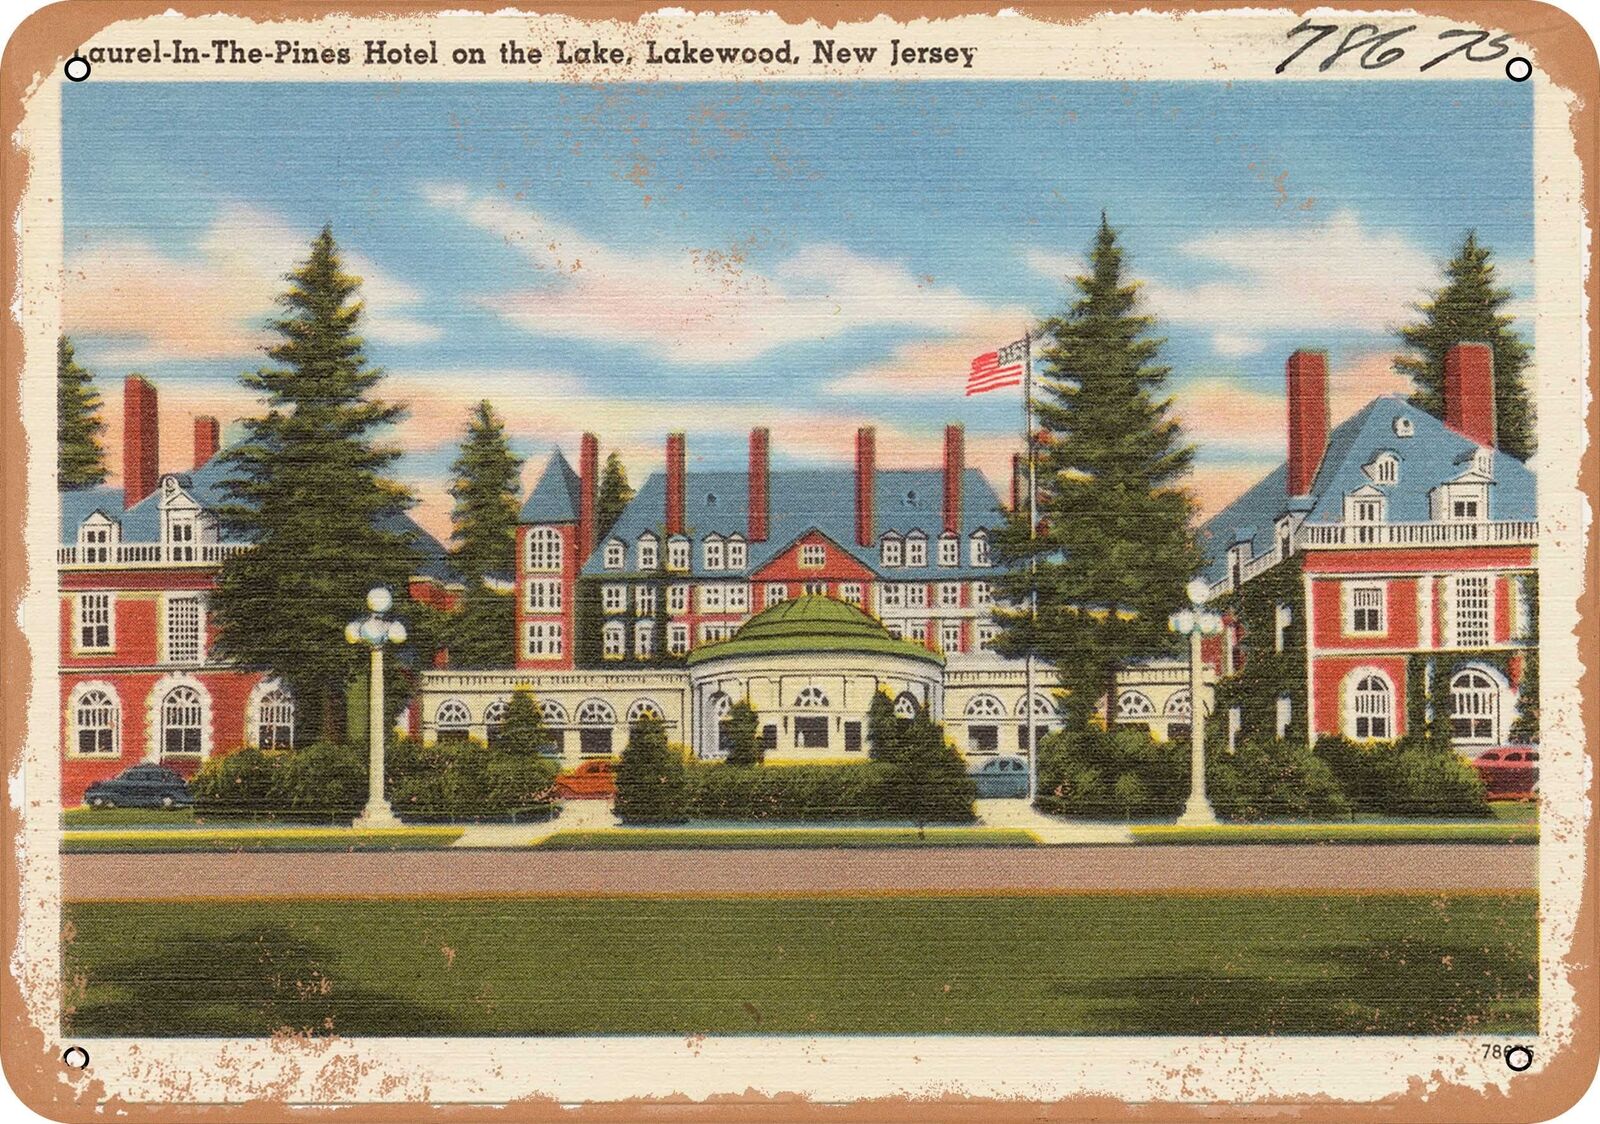 Metal Sign - New Jersey Postcard - Laurel-in-the-Pines Hotel on the Lake, Lakew